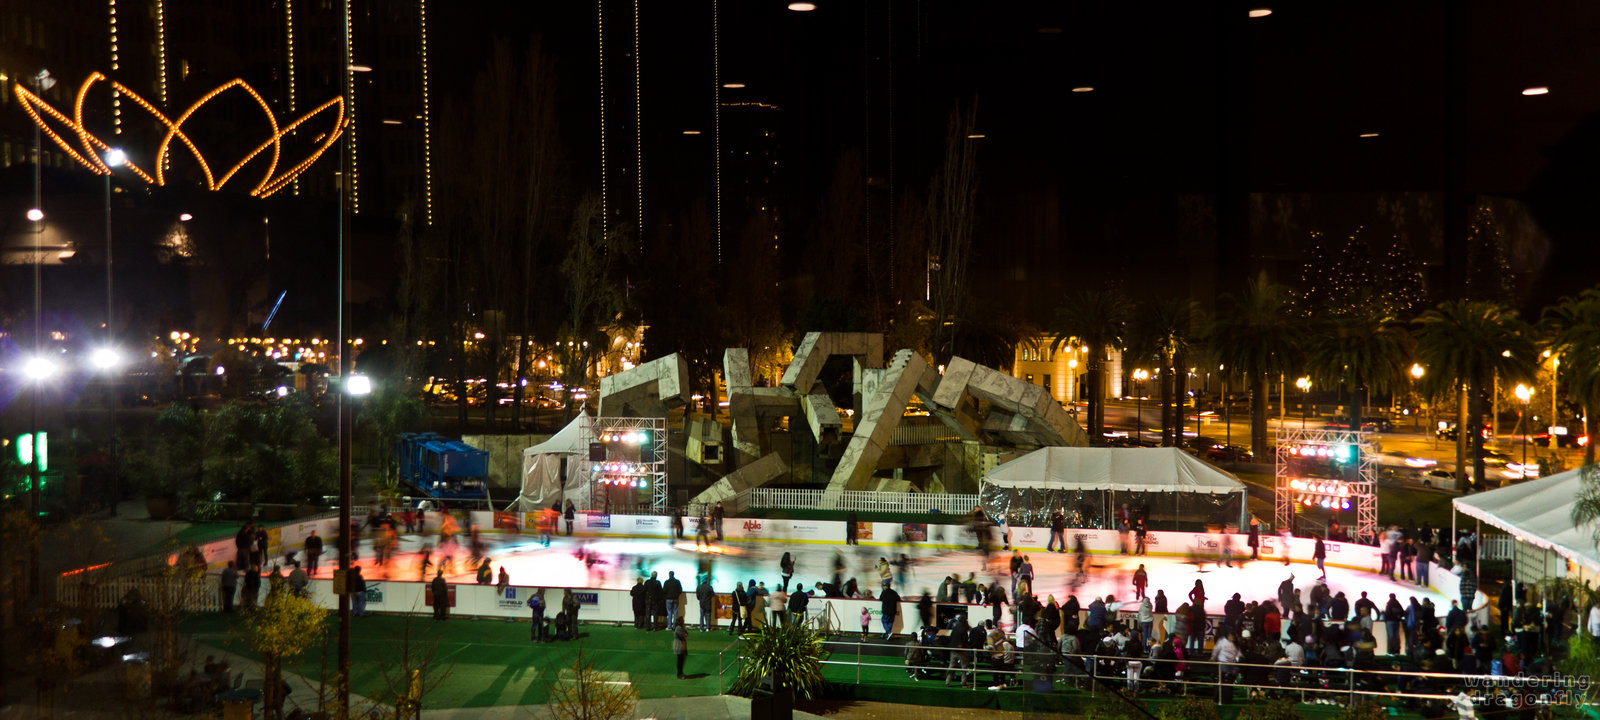 Skating rink at the Embarcadero Center with the reflection of the Tulip Flower -- christmas decoration, people, skating, skating ring